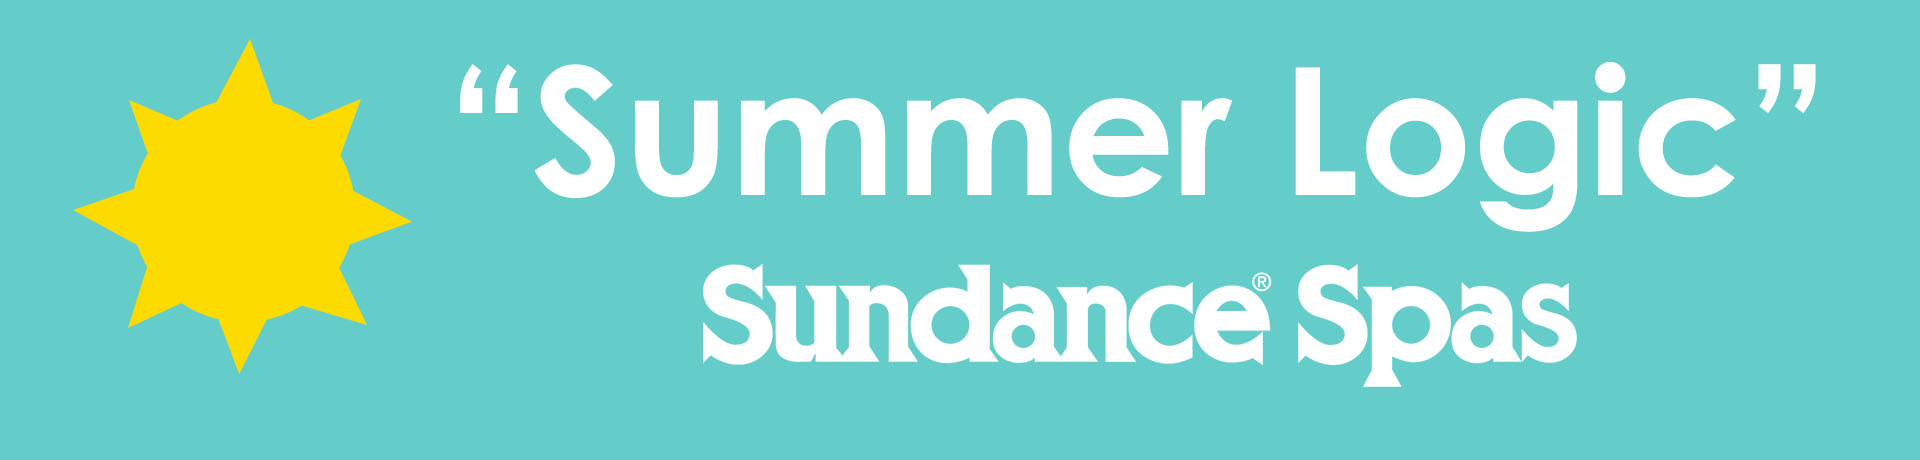 Summer Logic: What you need to know if you're a Sundance OwnerImage